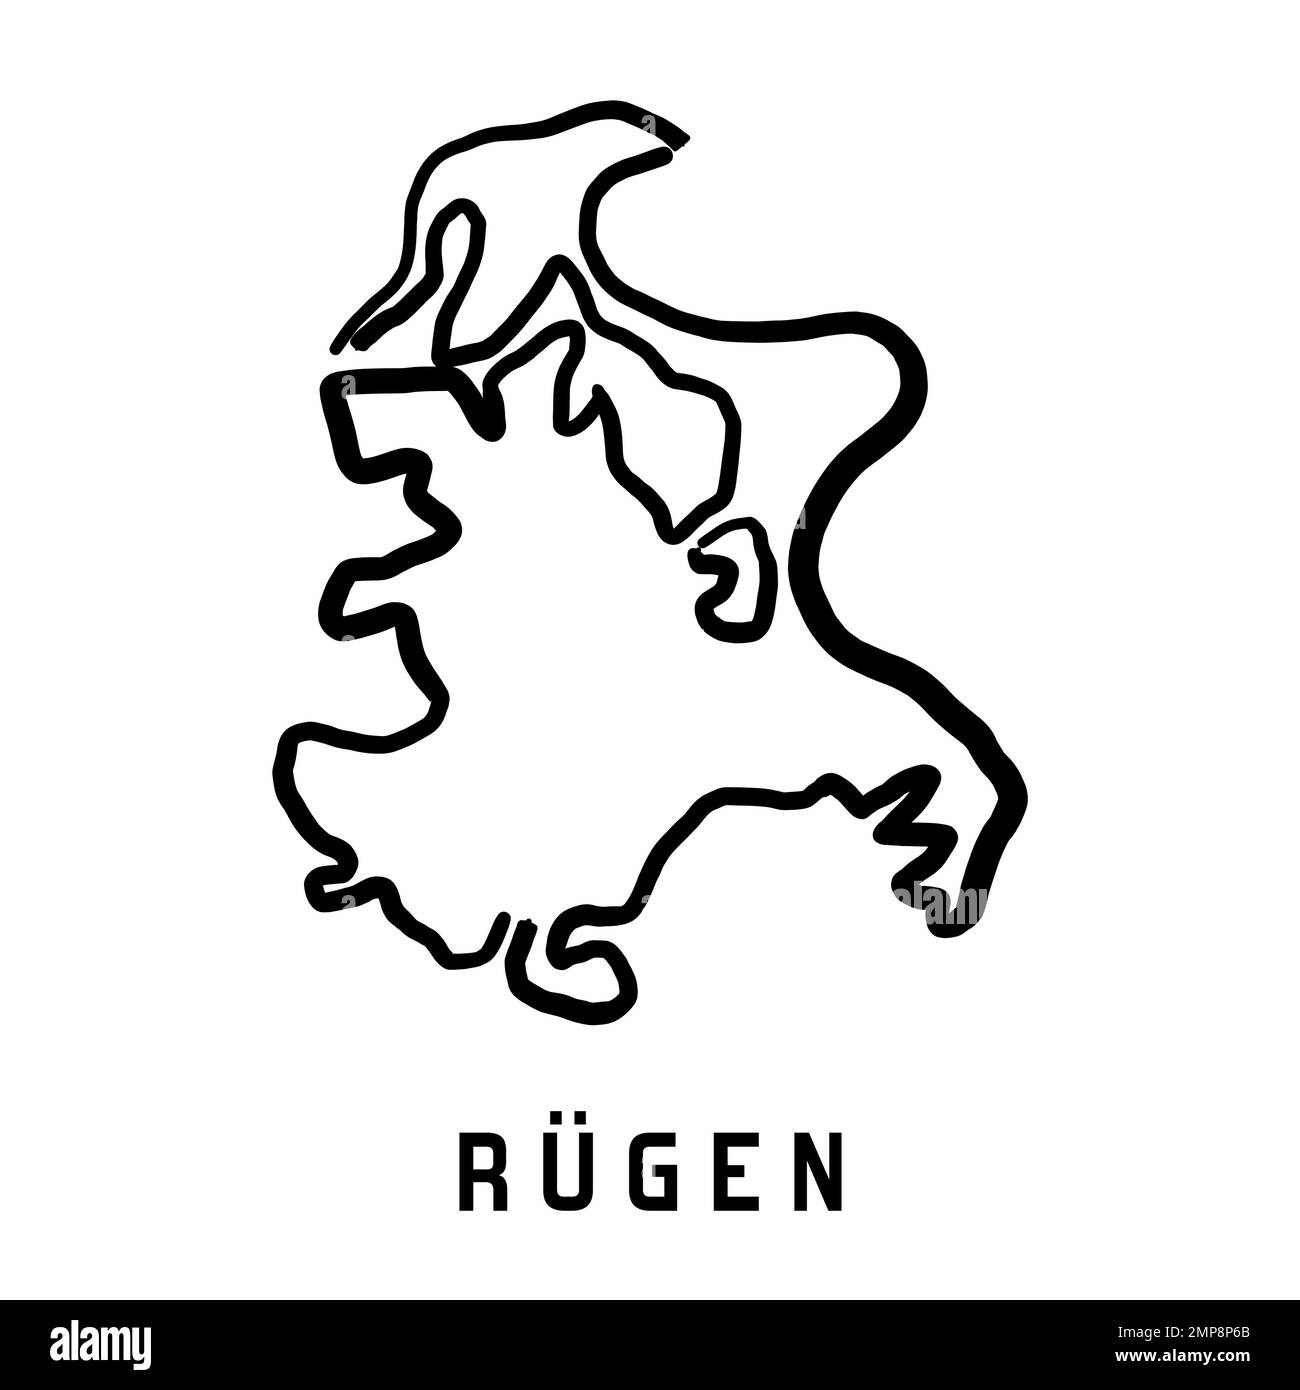 Rugen (Ruegen) island map simple outline. Vector hand drawn simplified style map. Rugen, Germany. Stock Vector